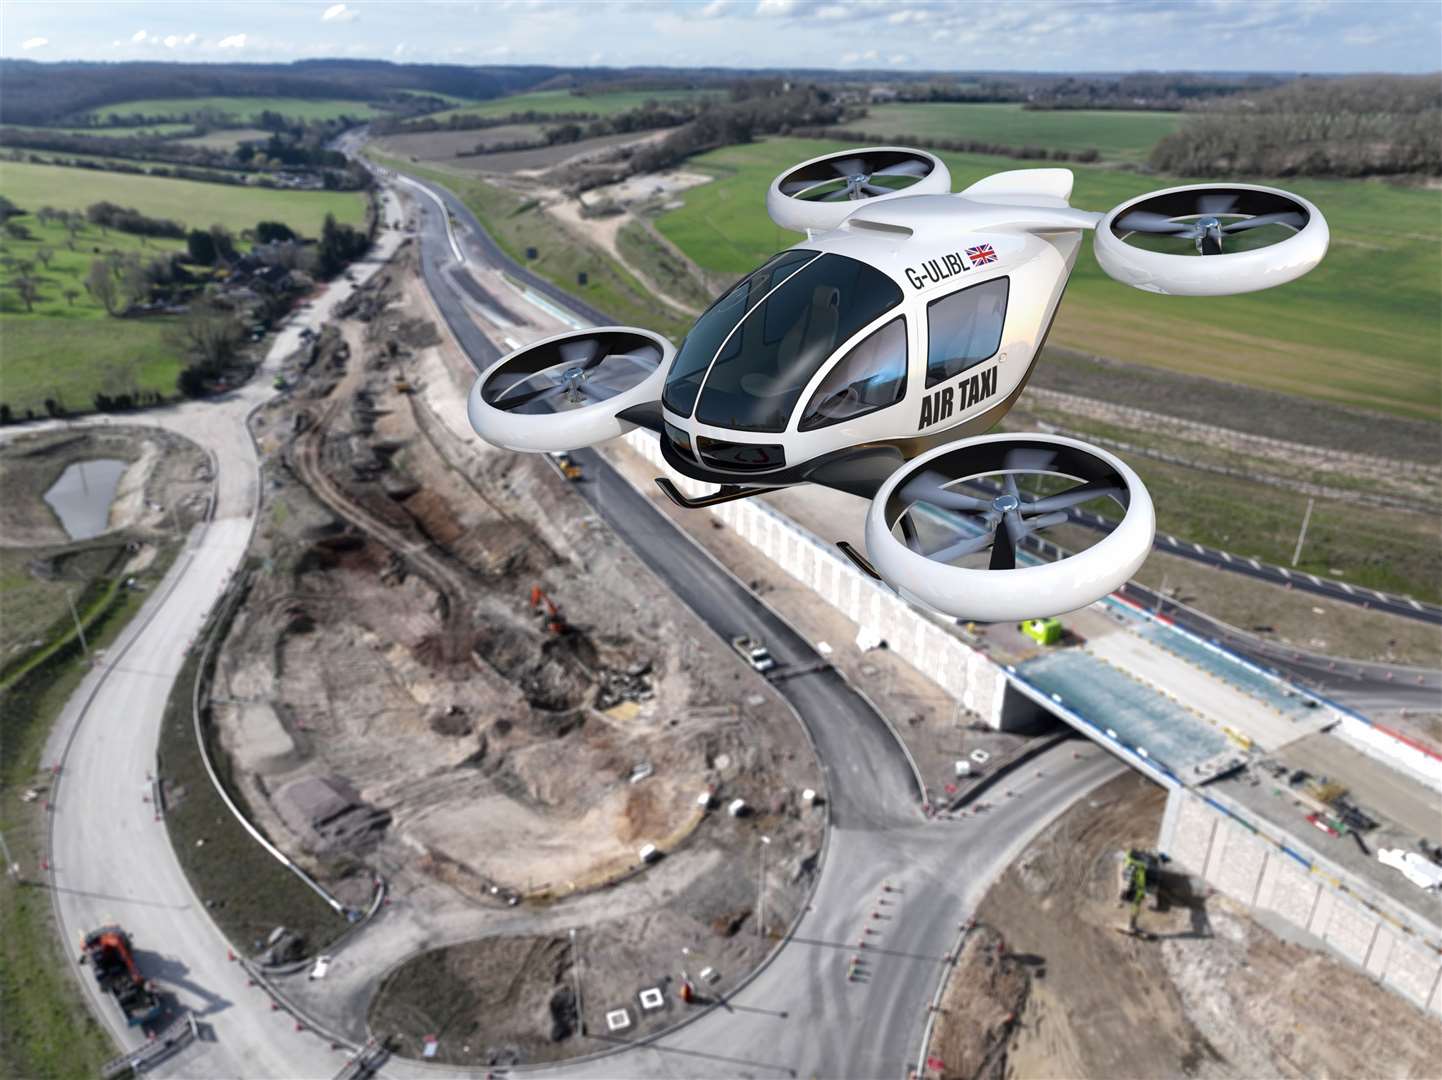 Did you beleive flying taxis would be flown over Sittingbourne?